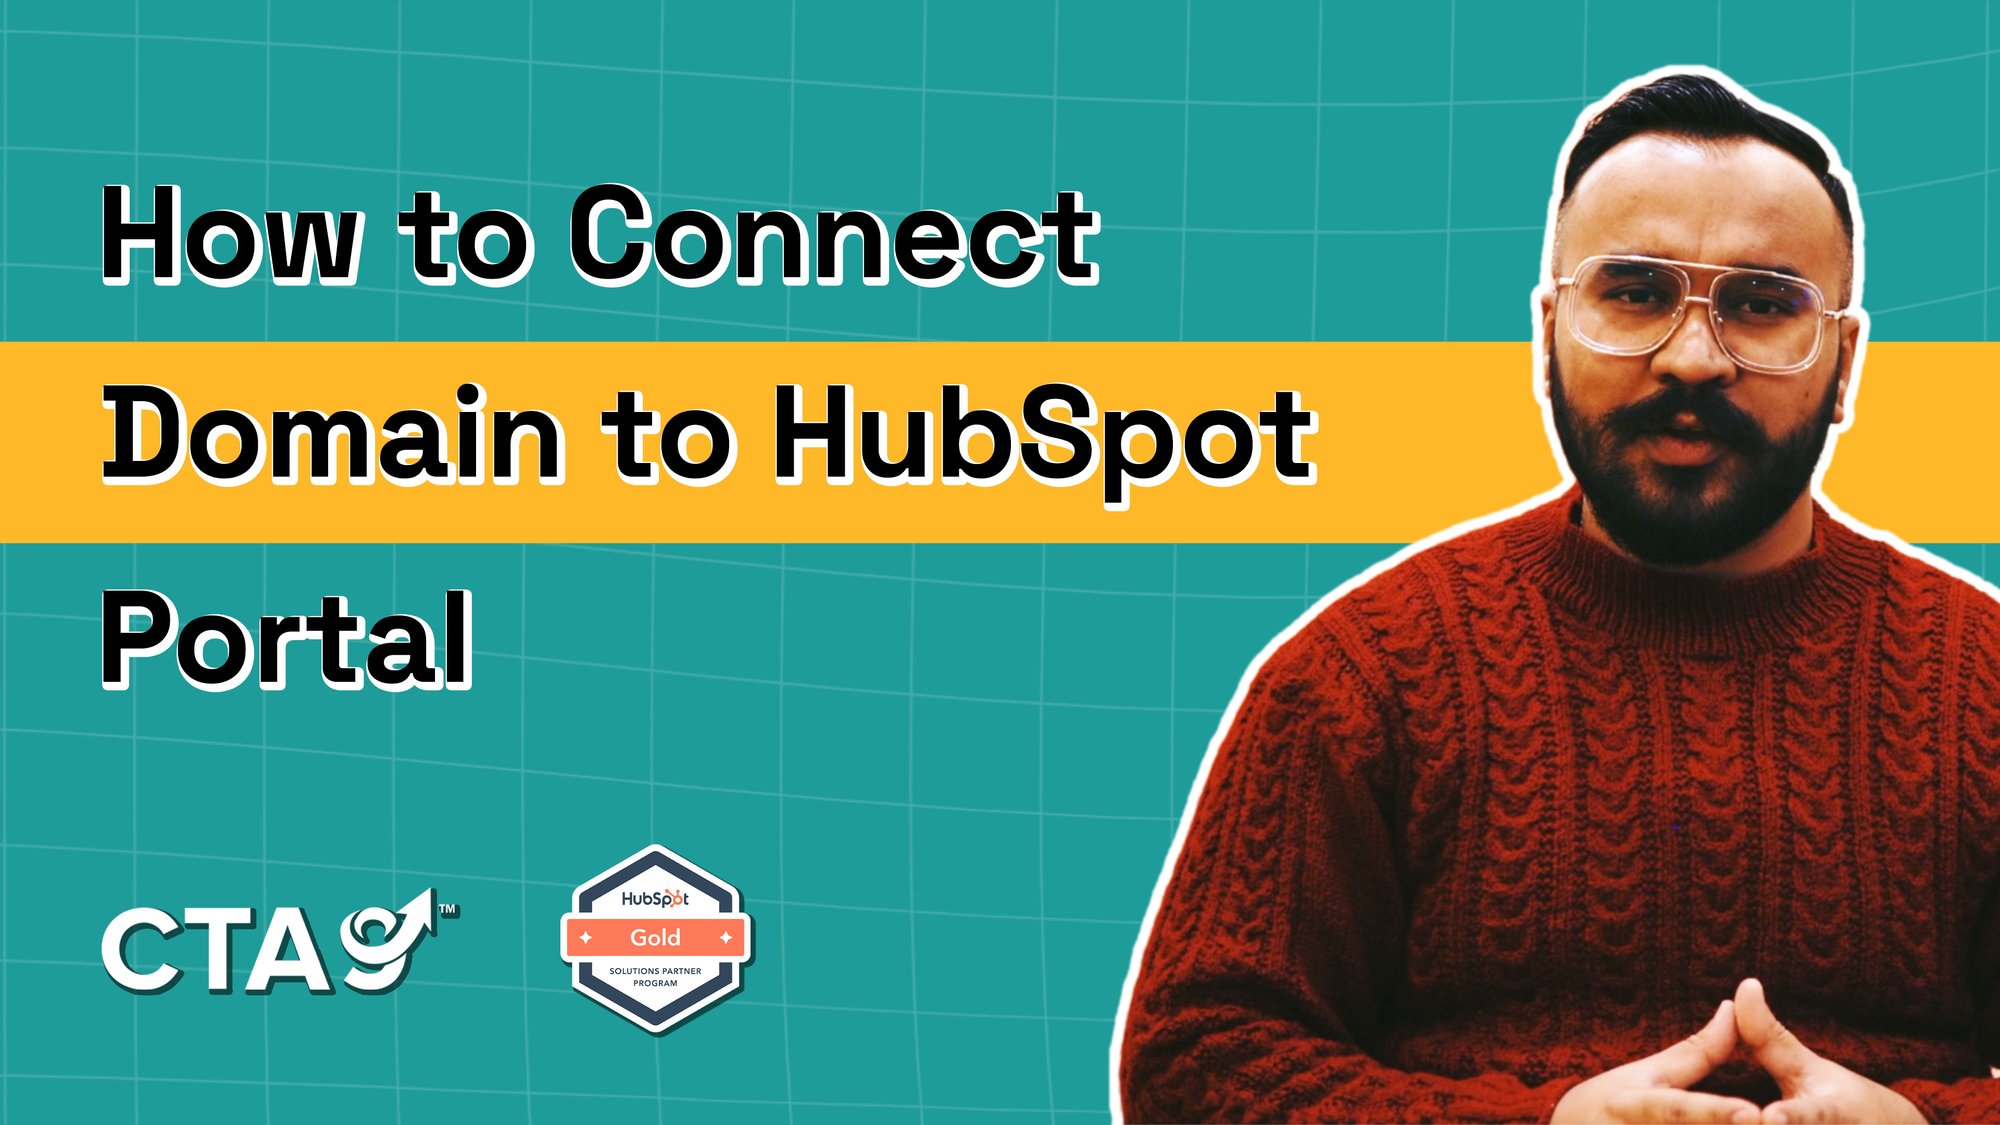 How to Connect Domain to HubSpot Portal1